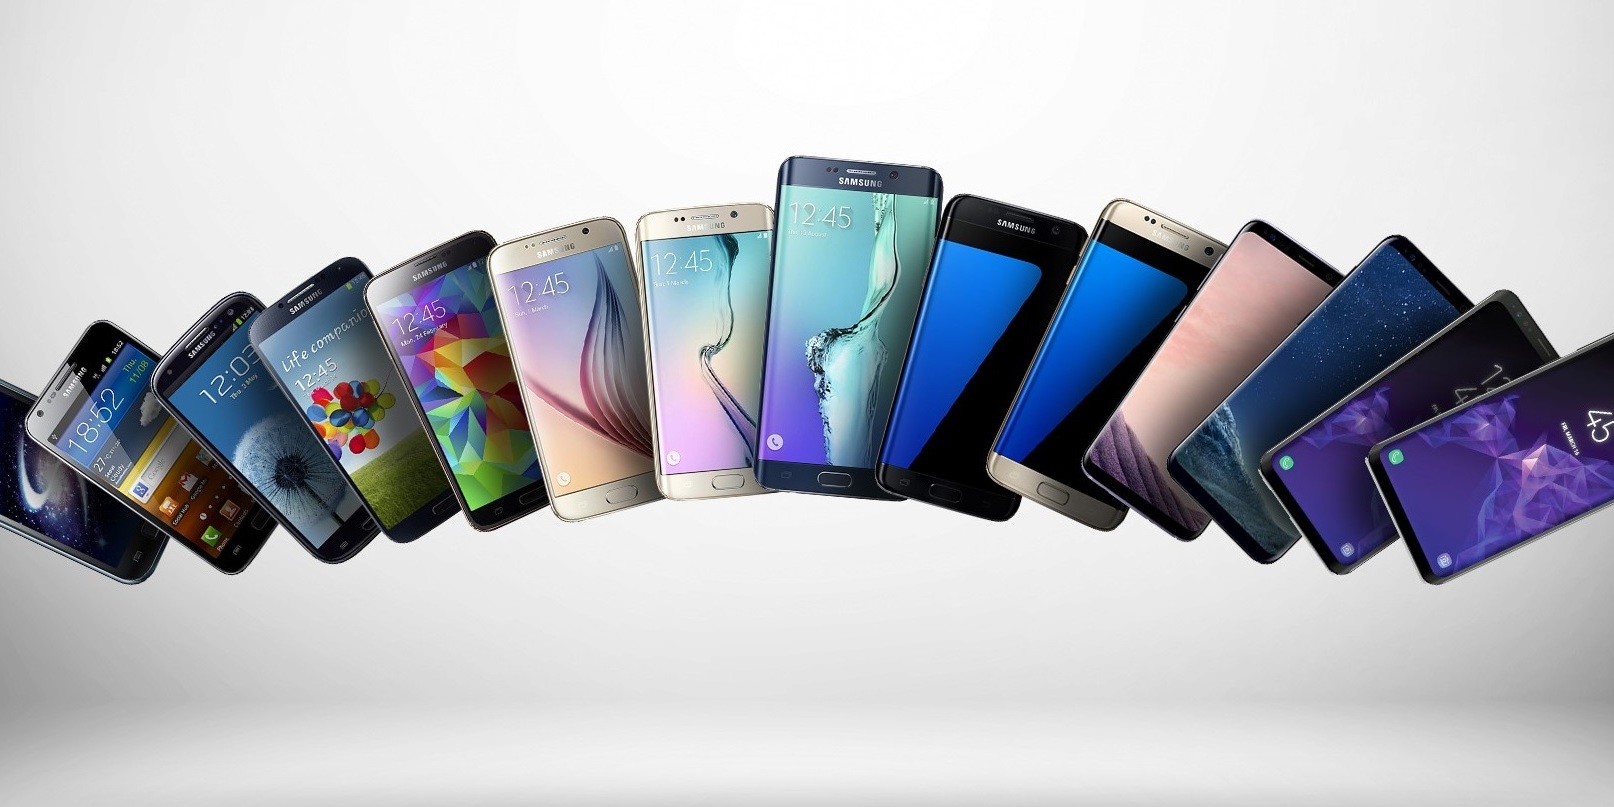 How Well Do You Know Samsung's Flagship Smartphone Line?